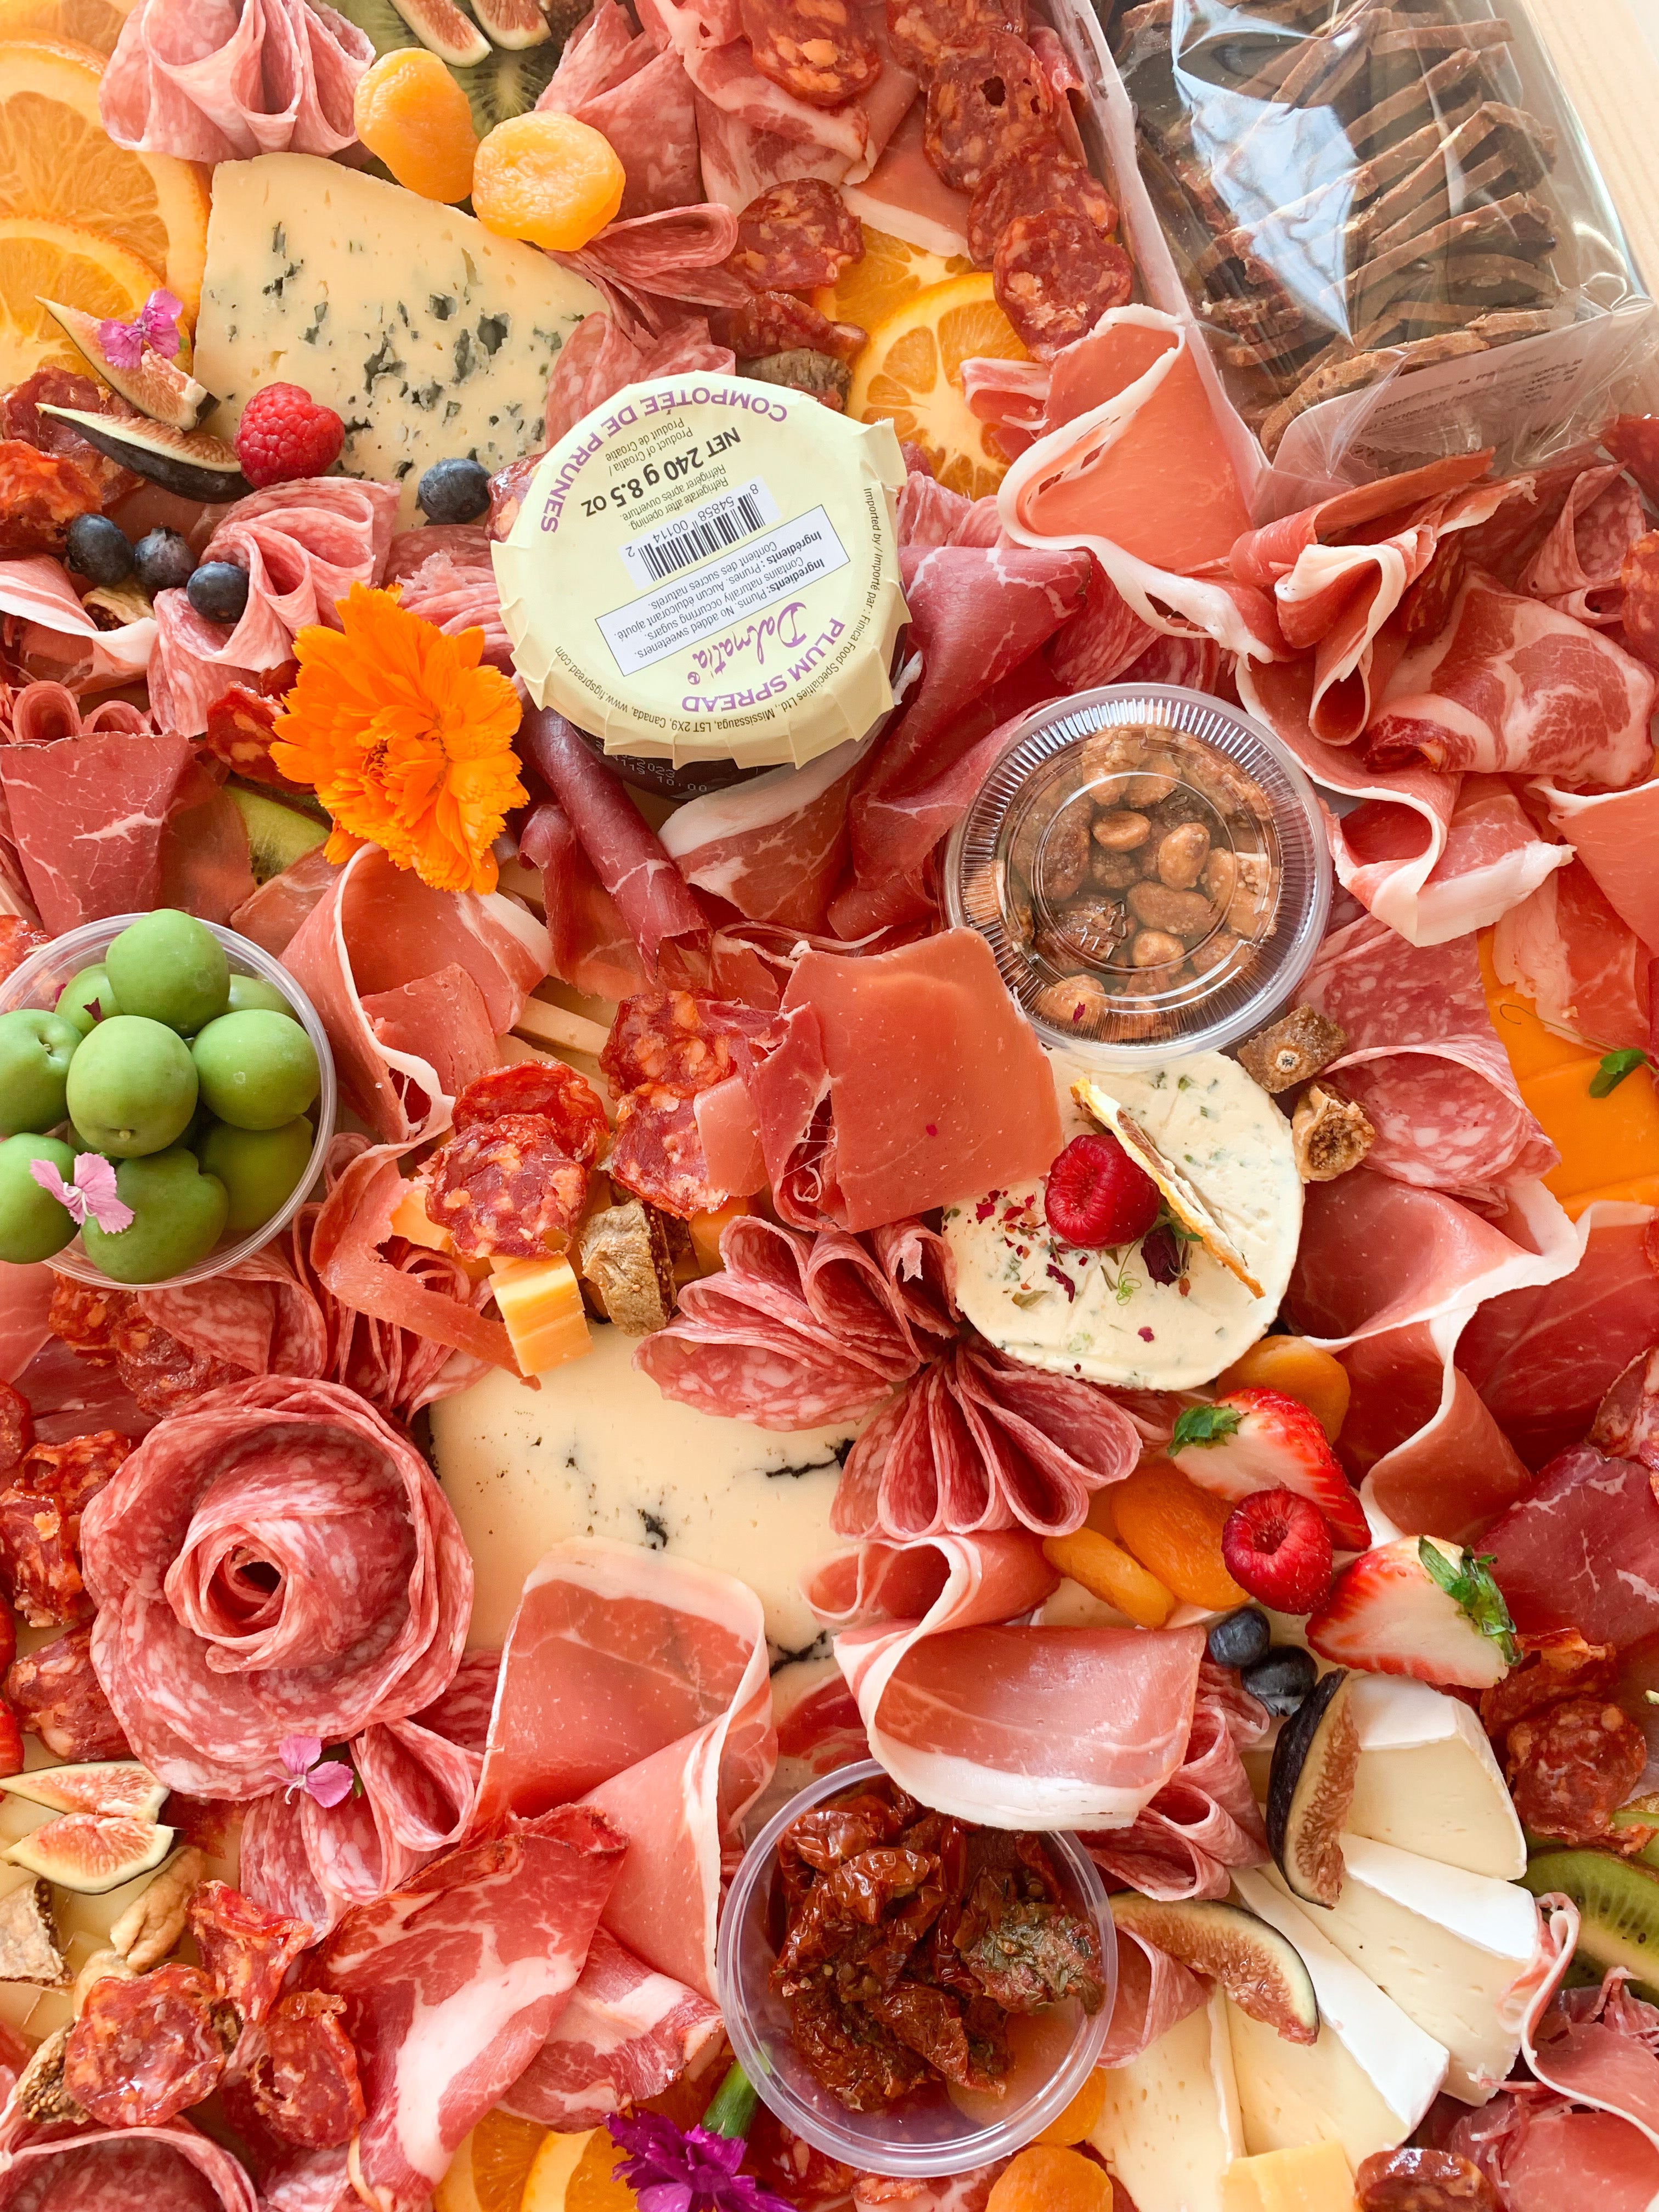 Best large charcuterie and cheese board for delivery in Toronto